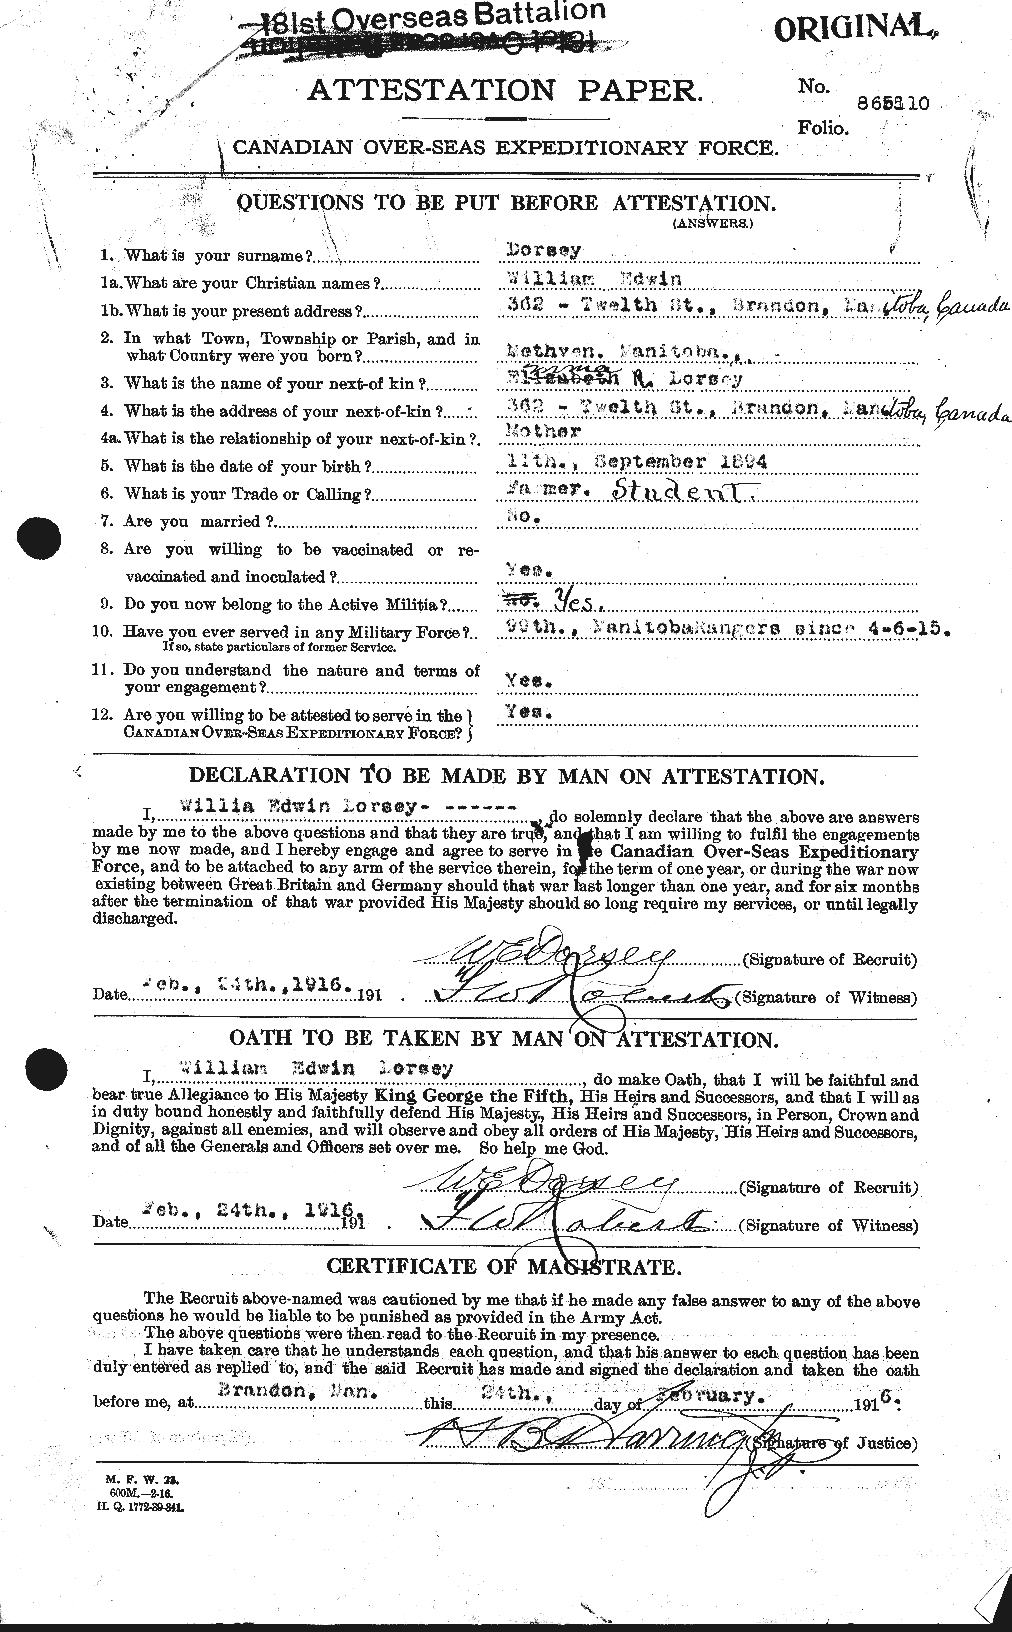 Personnel Records of the First World War - CEF 299569a